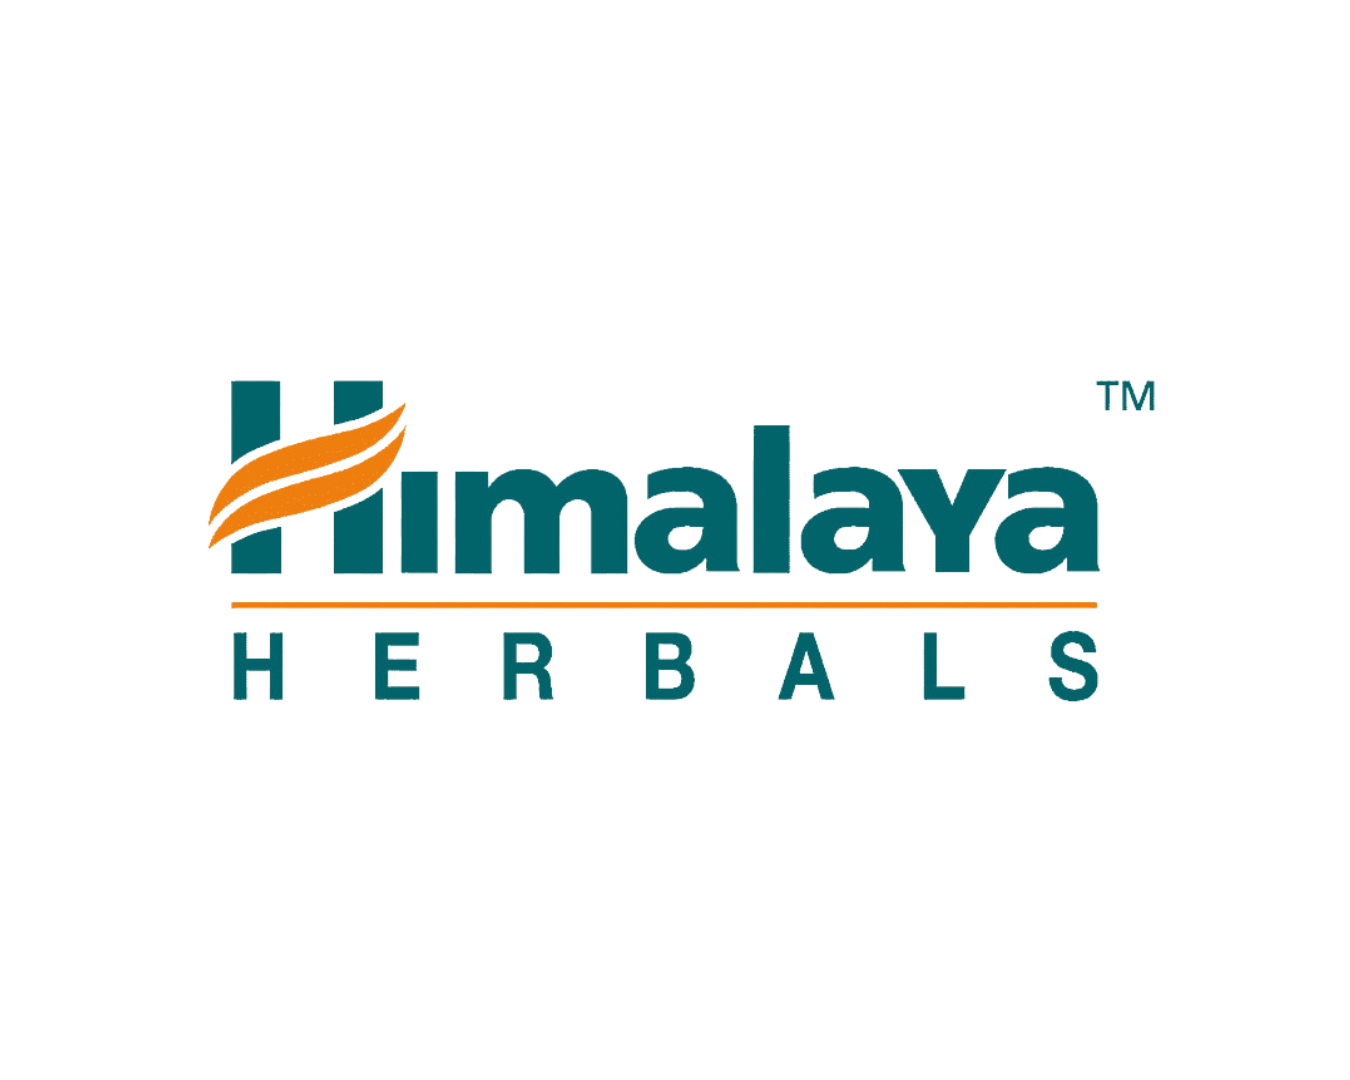 The logo and wordmark of Himalaya Herbals, a company that produces herbal products and supplements.